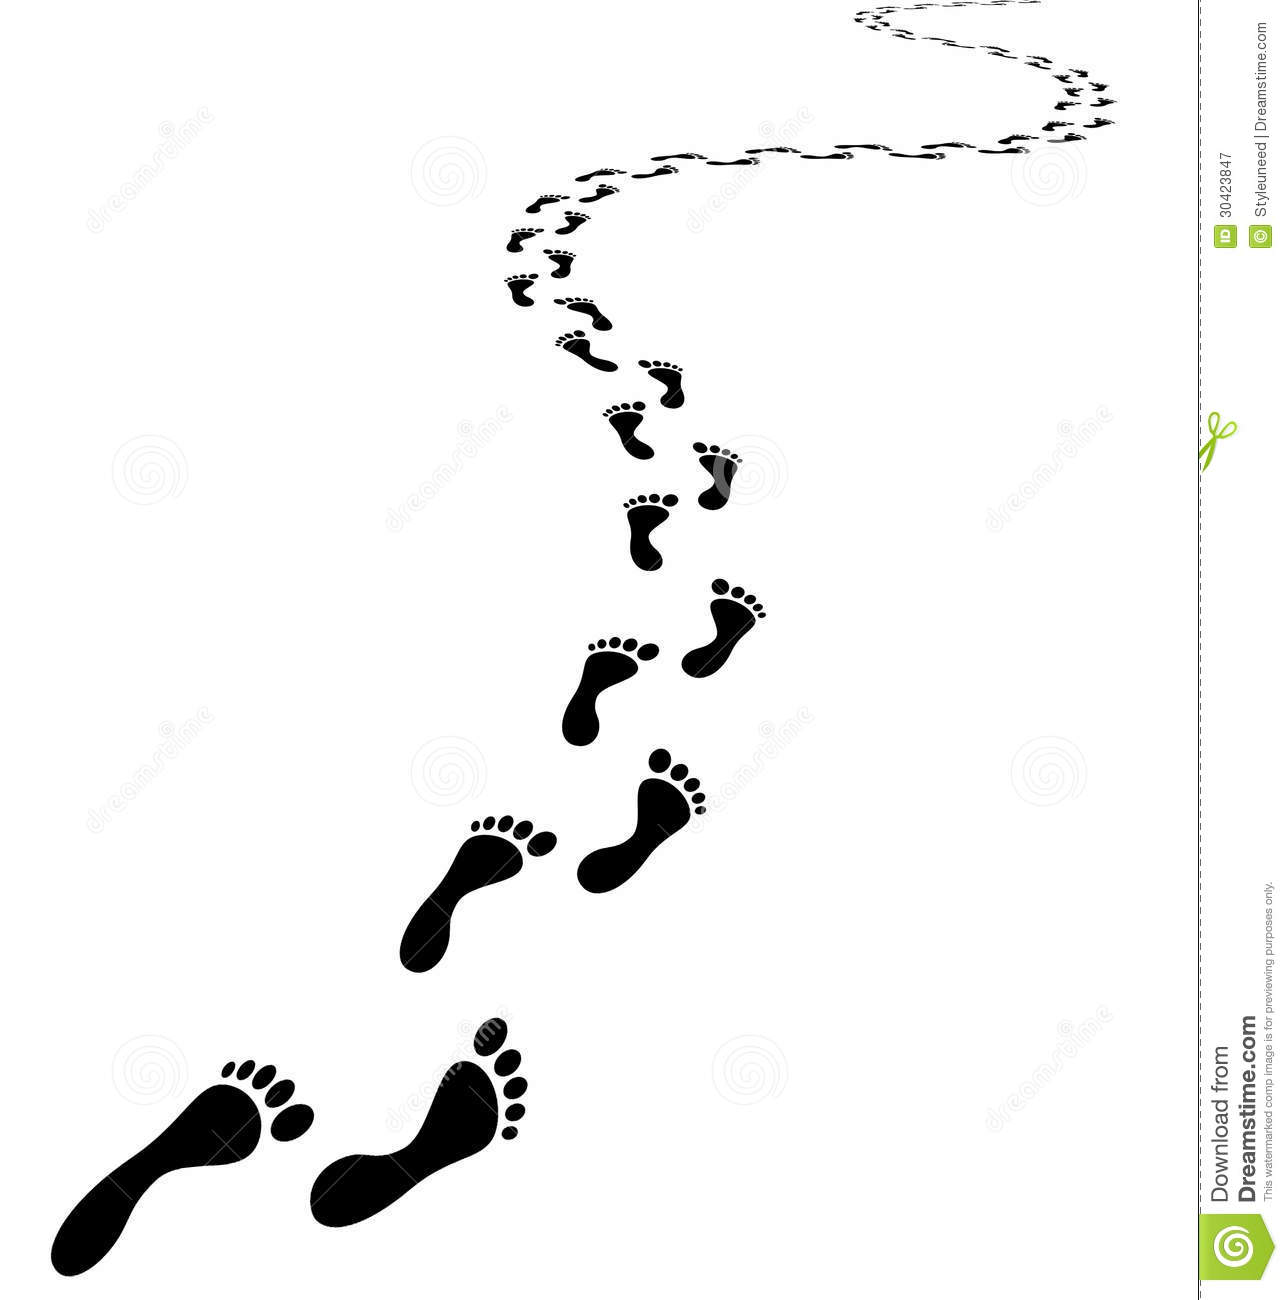 Footprints Vanishing Into The Distance Royalty Free Stock Photography    